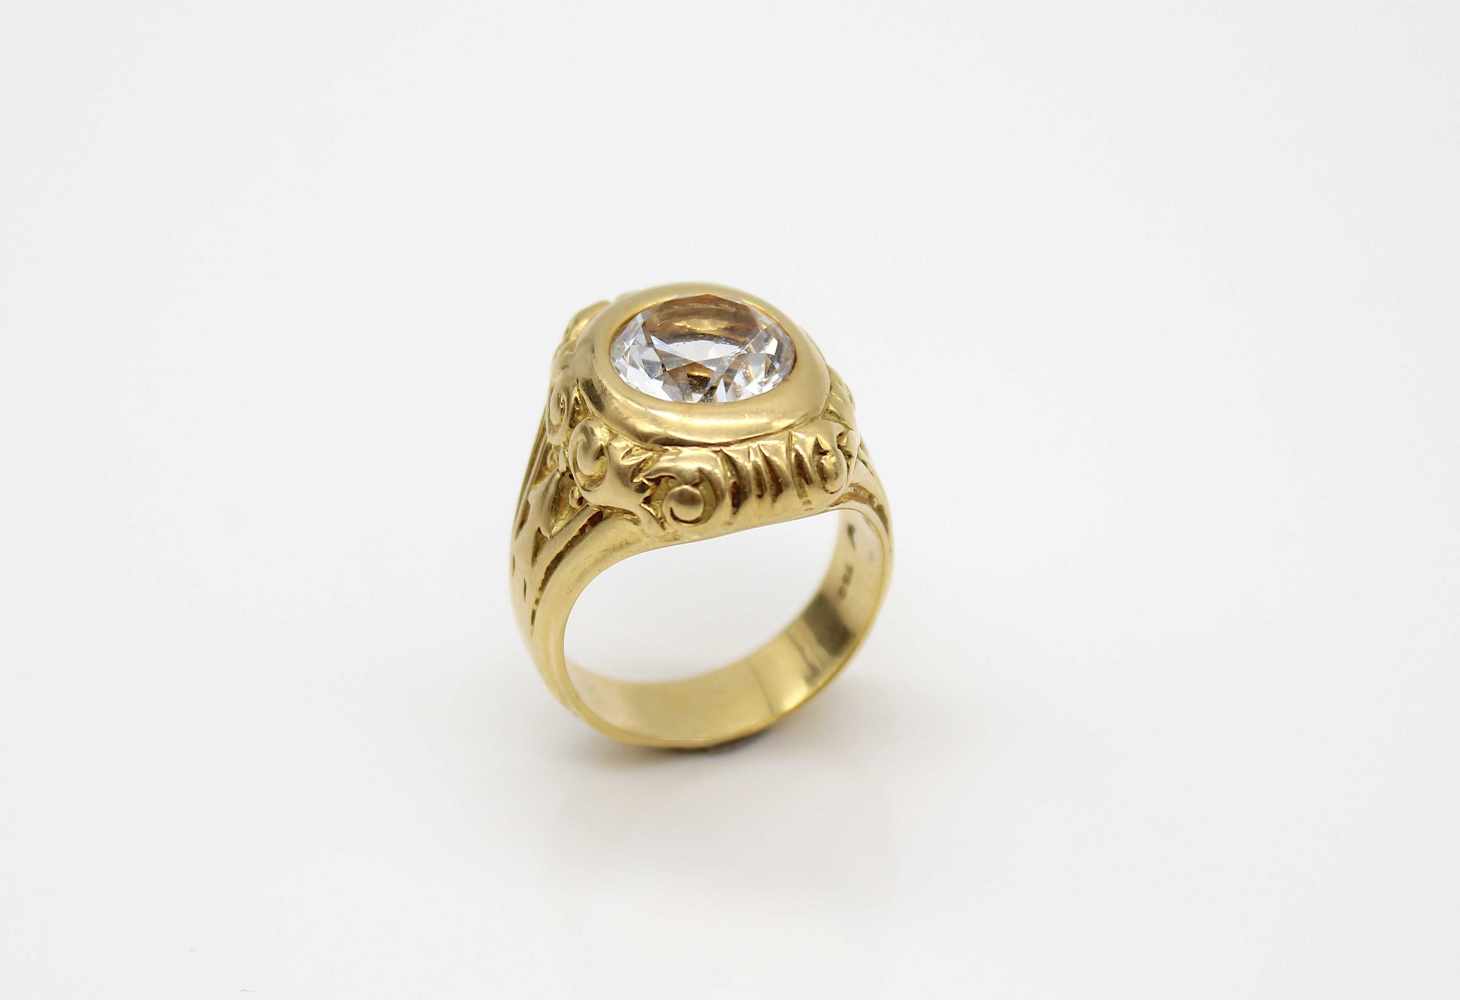 Ring of 750 gold with a topaz.Weight 24.5 g, size 60- - -15.00 % buyer's premium on the hammer - Image 3 of 3